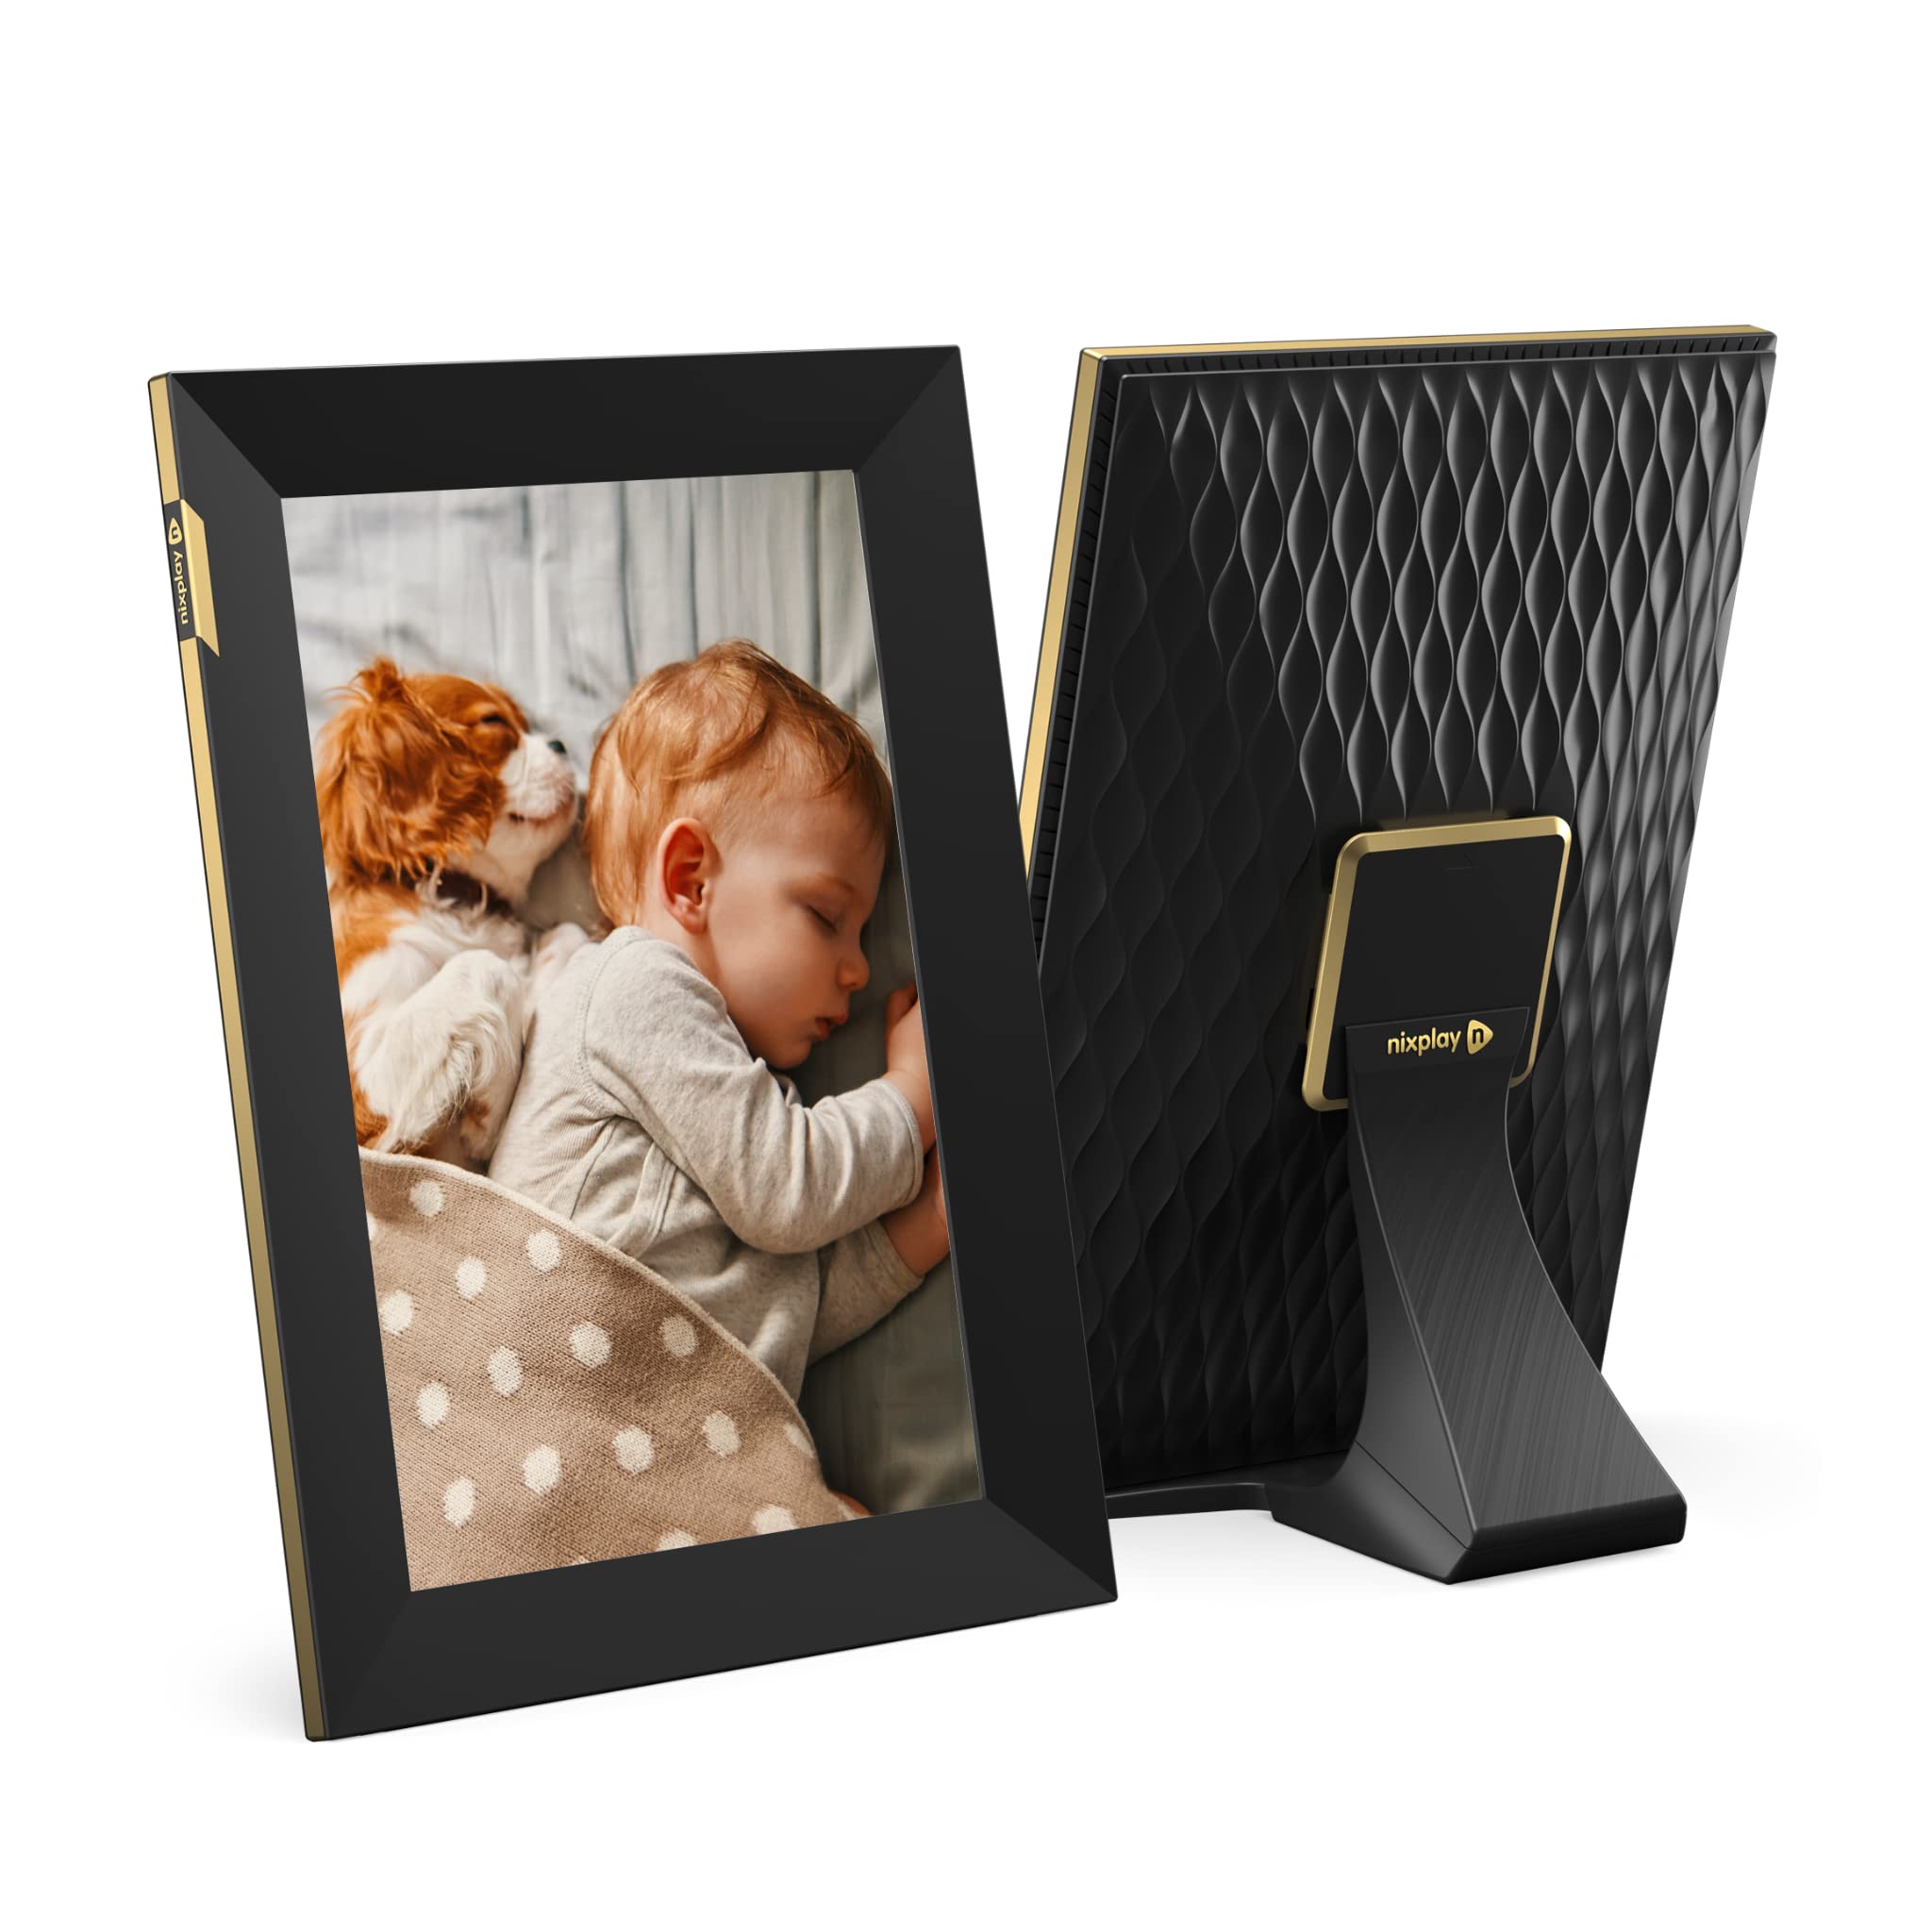 Nixplay W10K - Black Gold 10.1 inch Touch Screen Digital Picture Frame with WiFi - Share Photos and Videos Instantly via Email or App - Preload Content